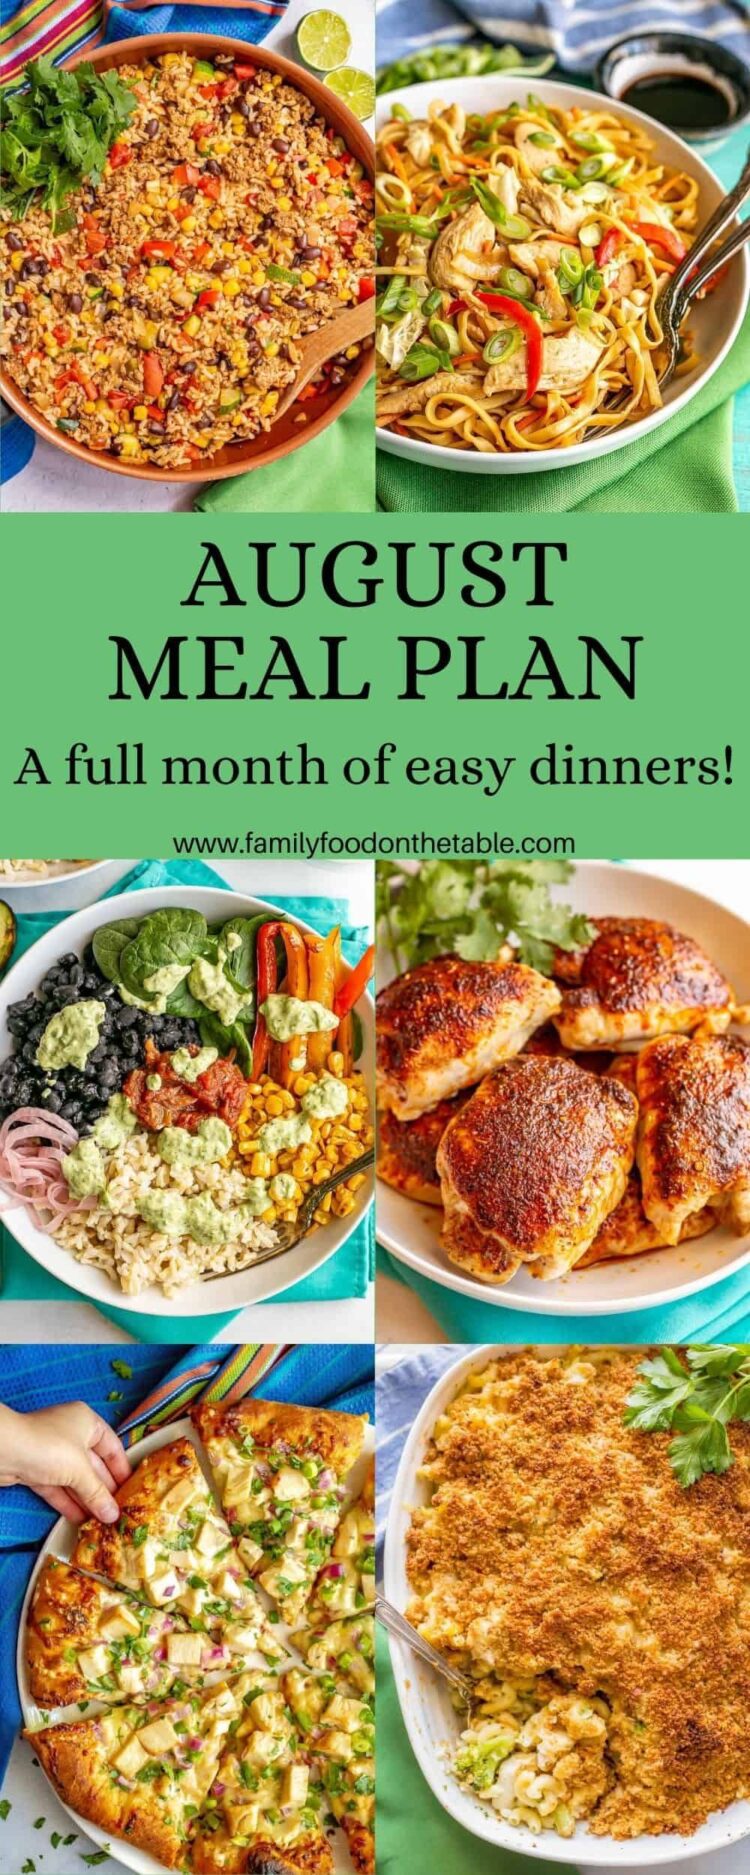 August Meal Plan Images